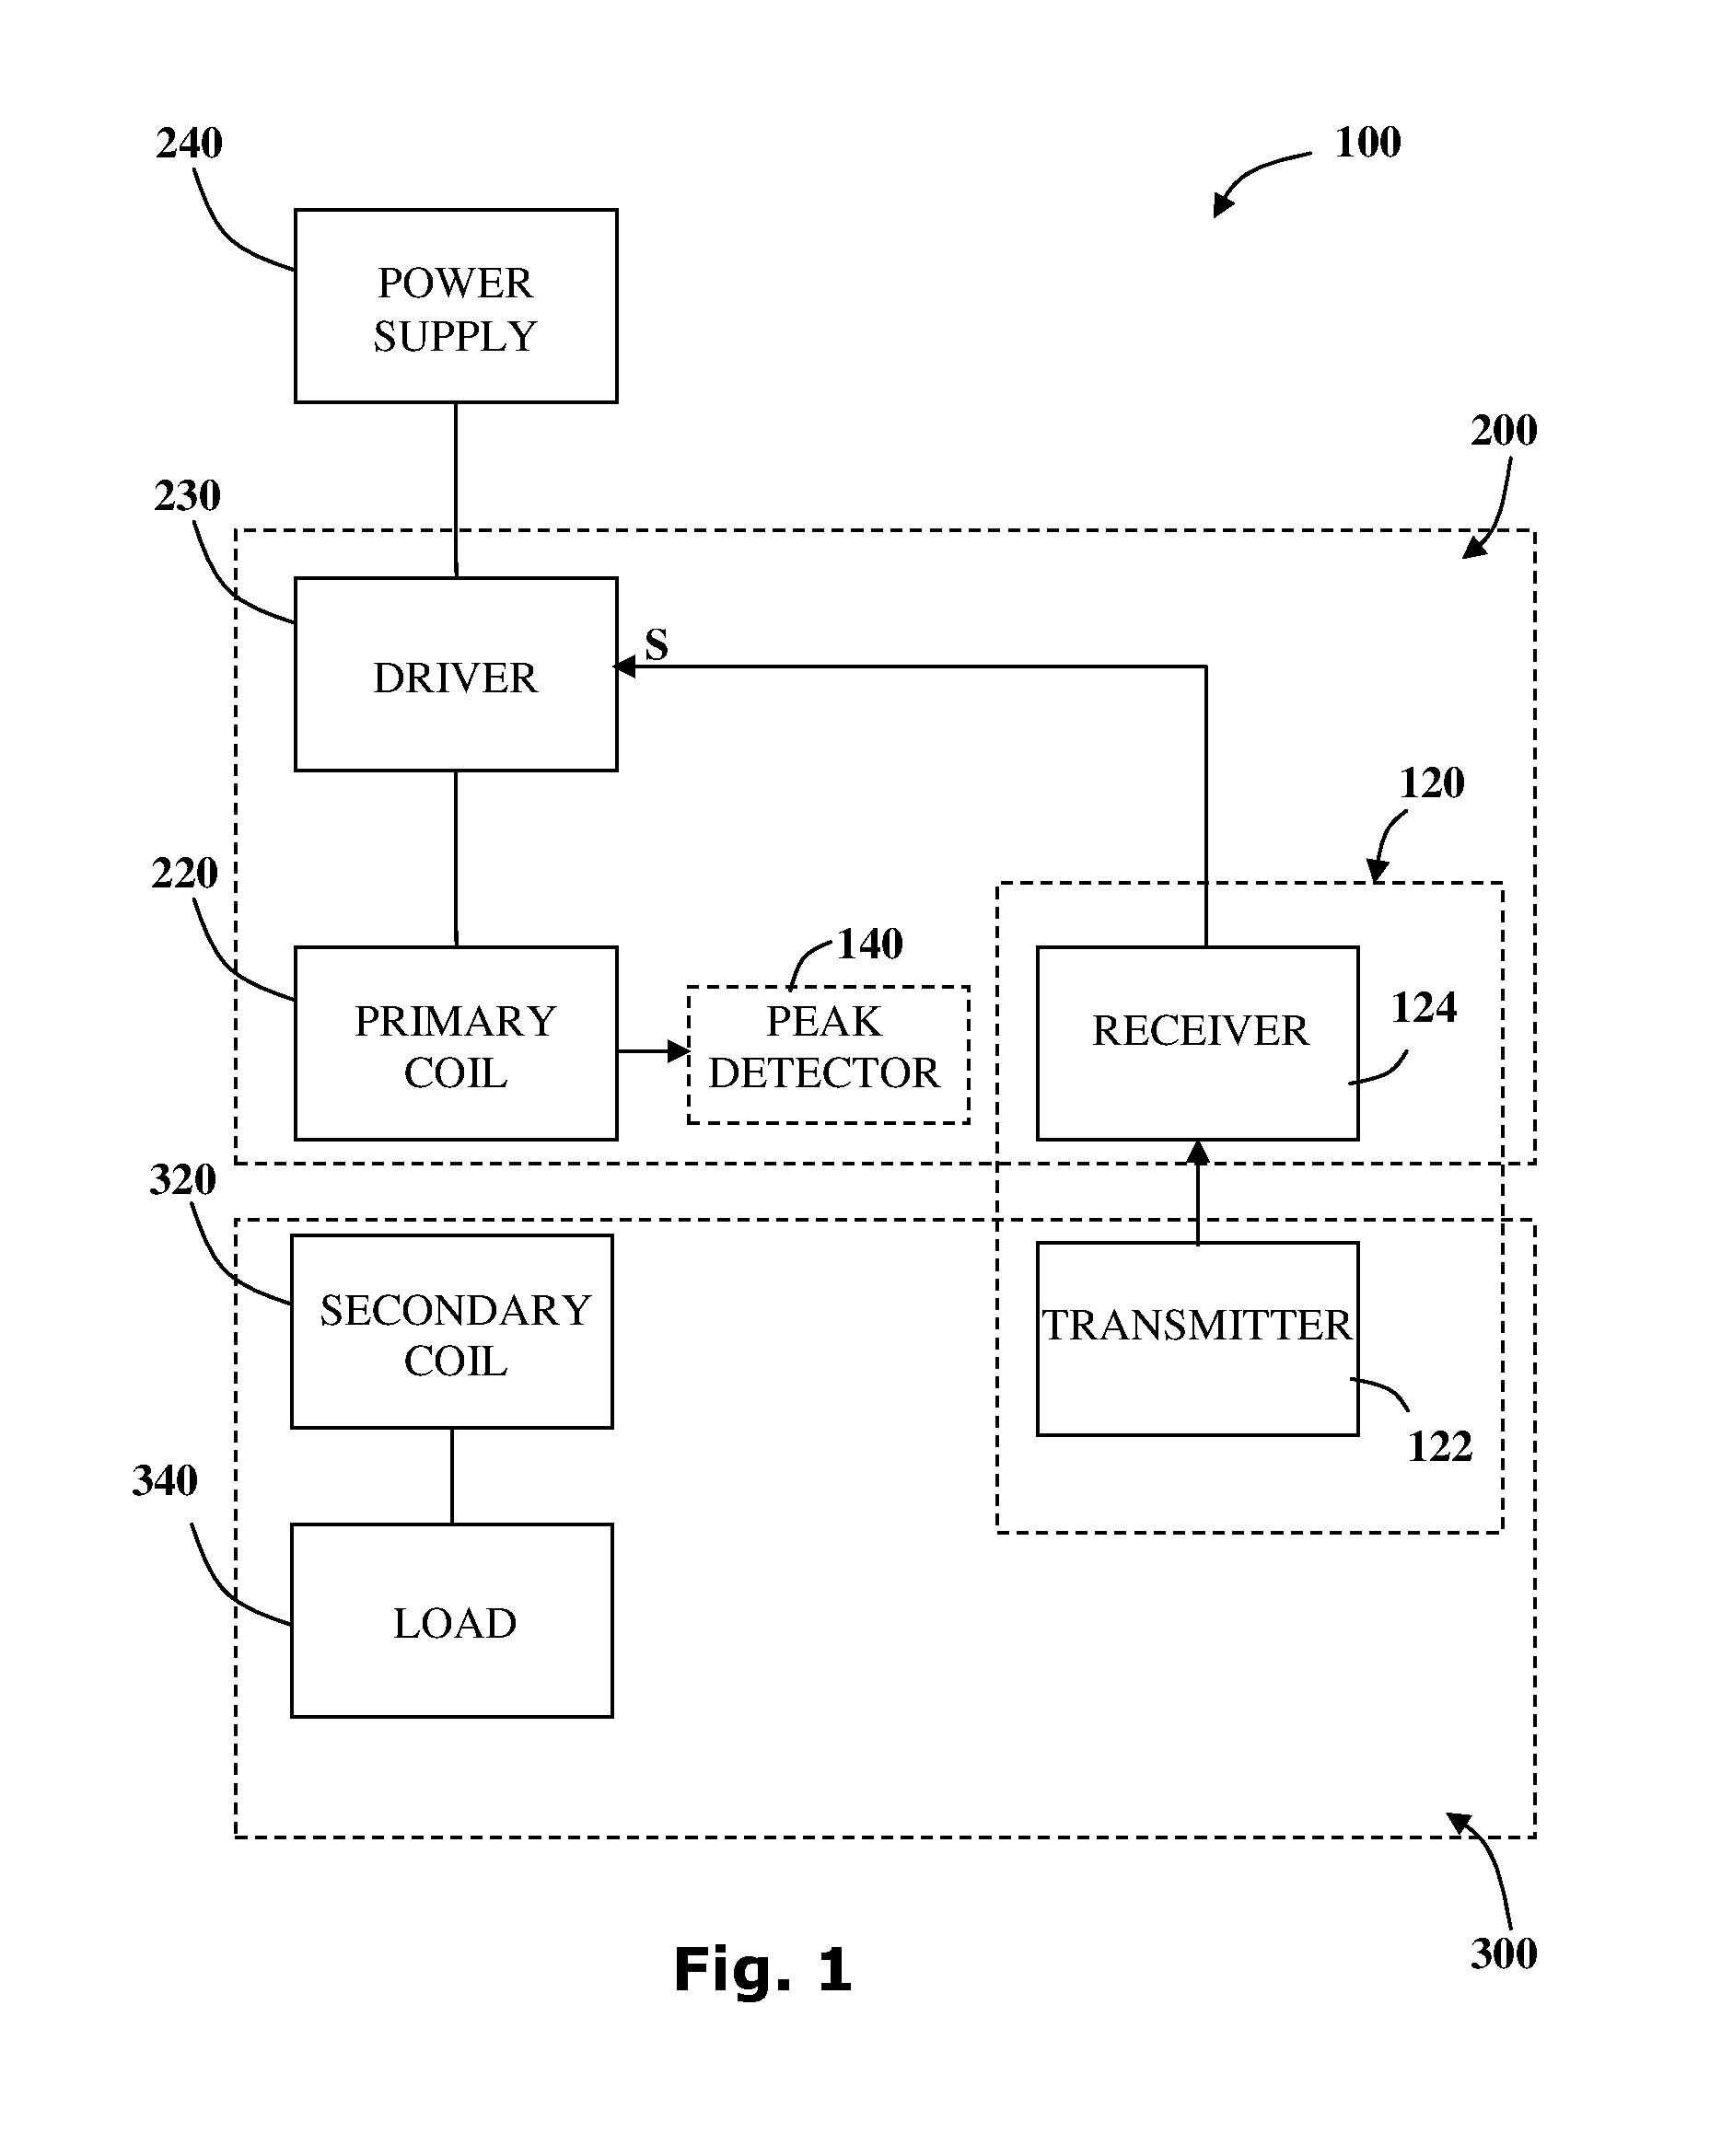 Wireless power transmission system and method controlled via digital messages